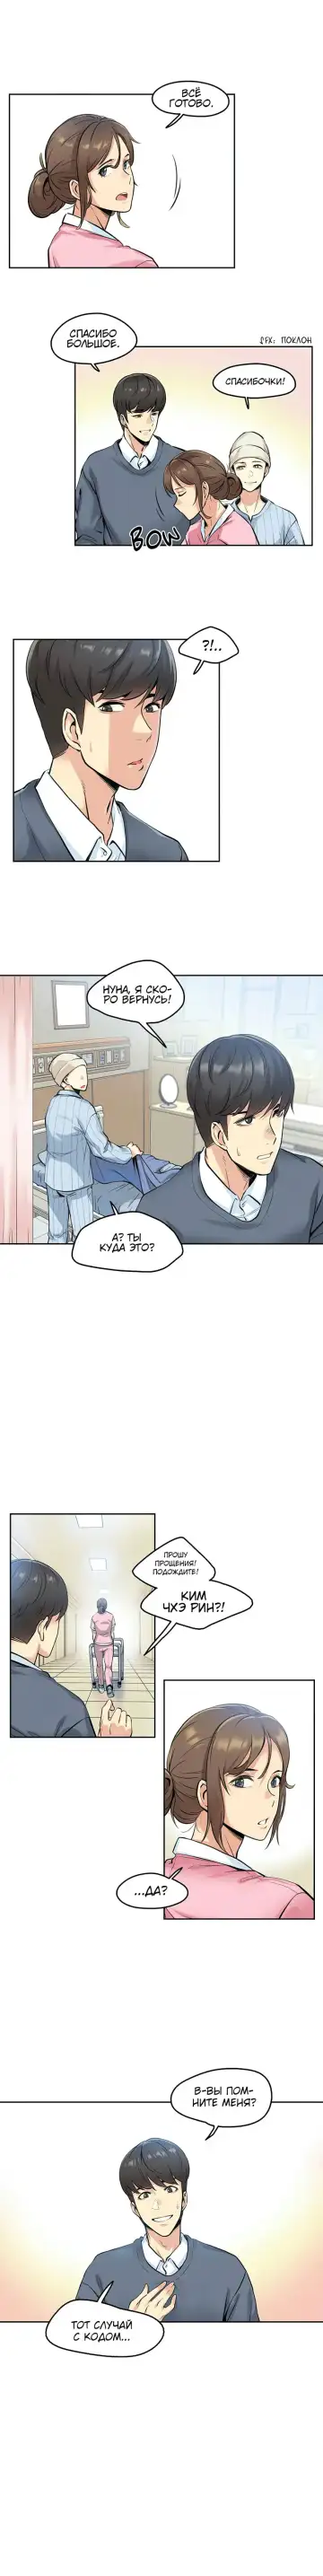 [Gamang] DADDY'S WILD OATS | Surrogate Father Ch. 1-16 Fhentai.net - Page 34